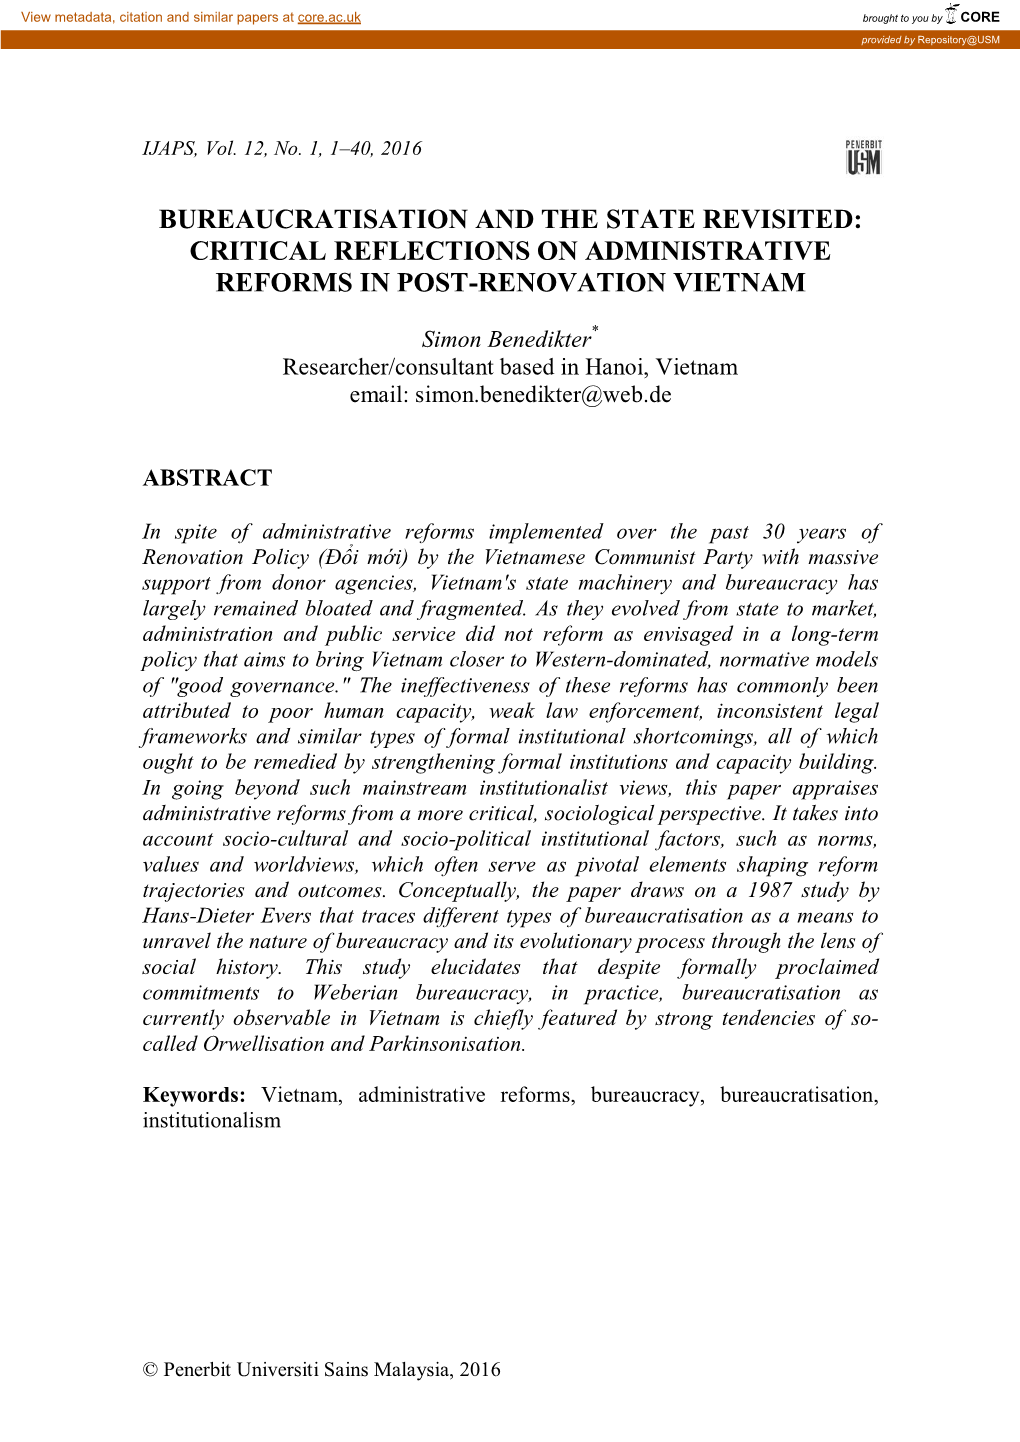 Critical Reflections on Administrative Reforms in Post-Renovation Vietnam